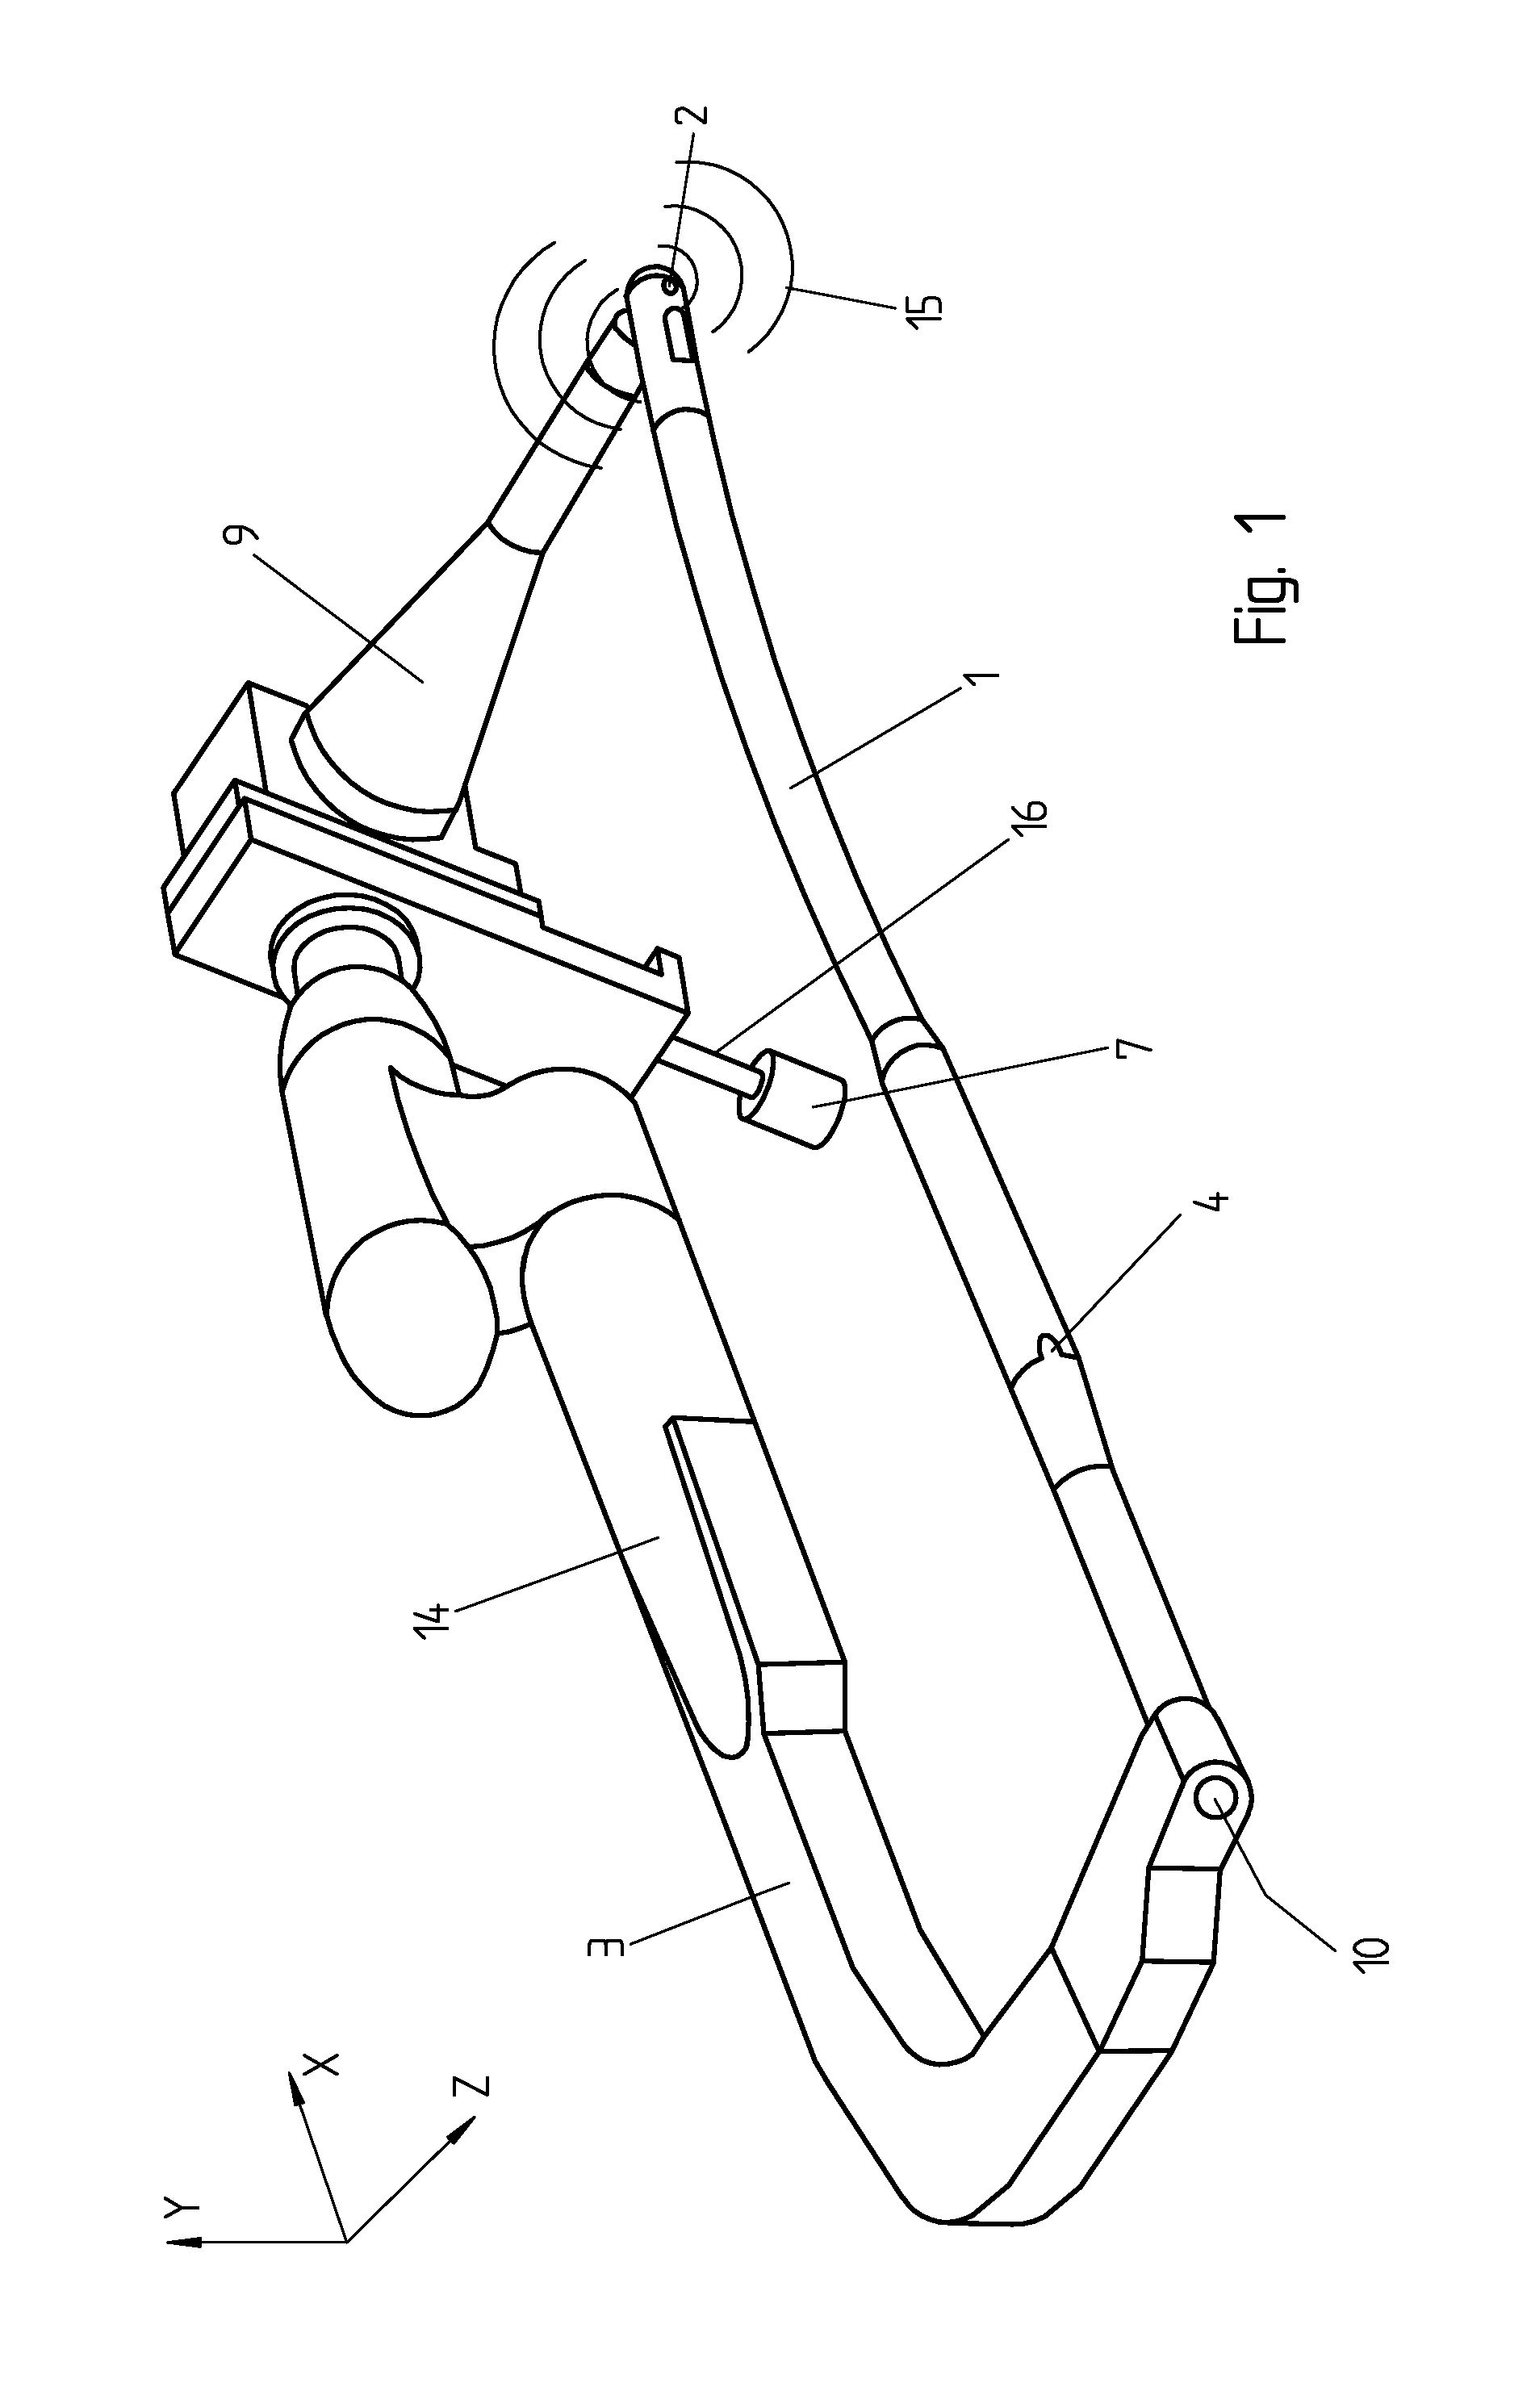 Device for positioning and adjusting a viewing axis